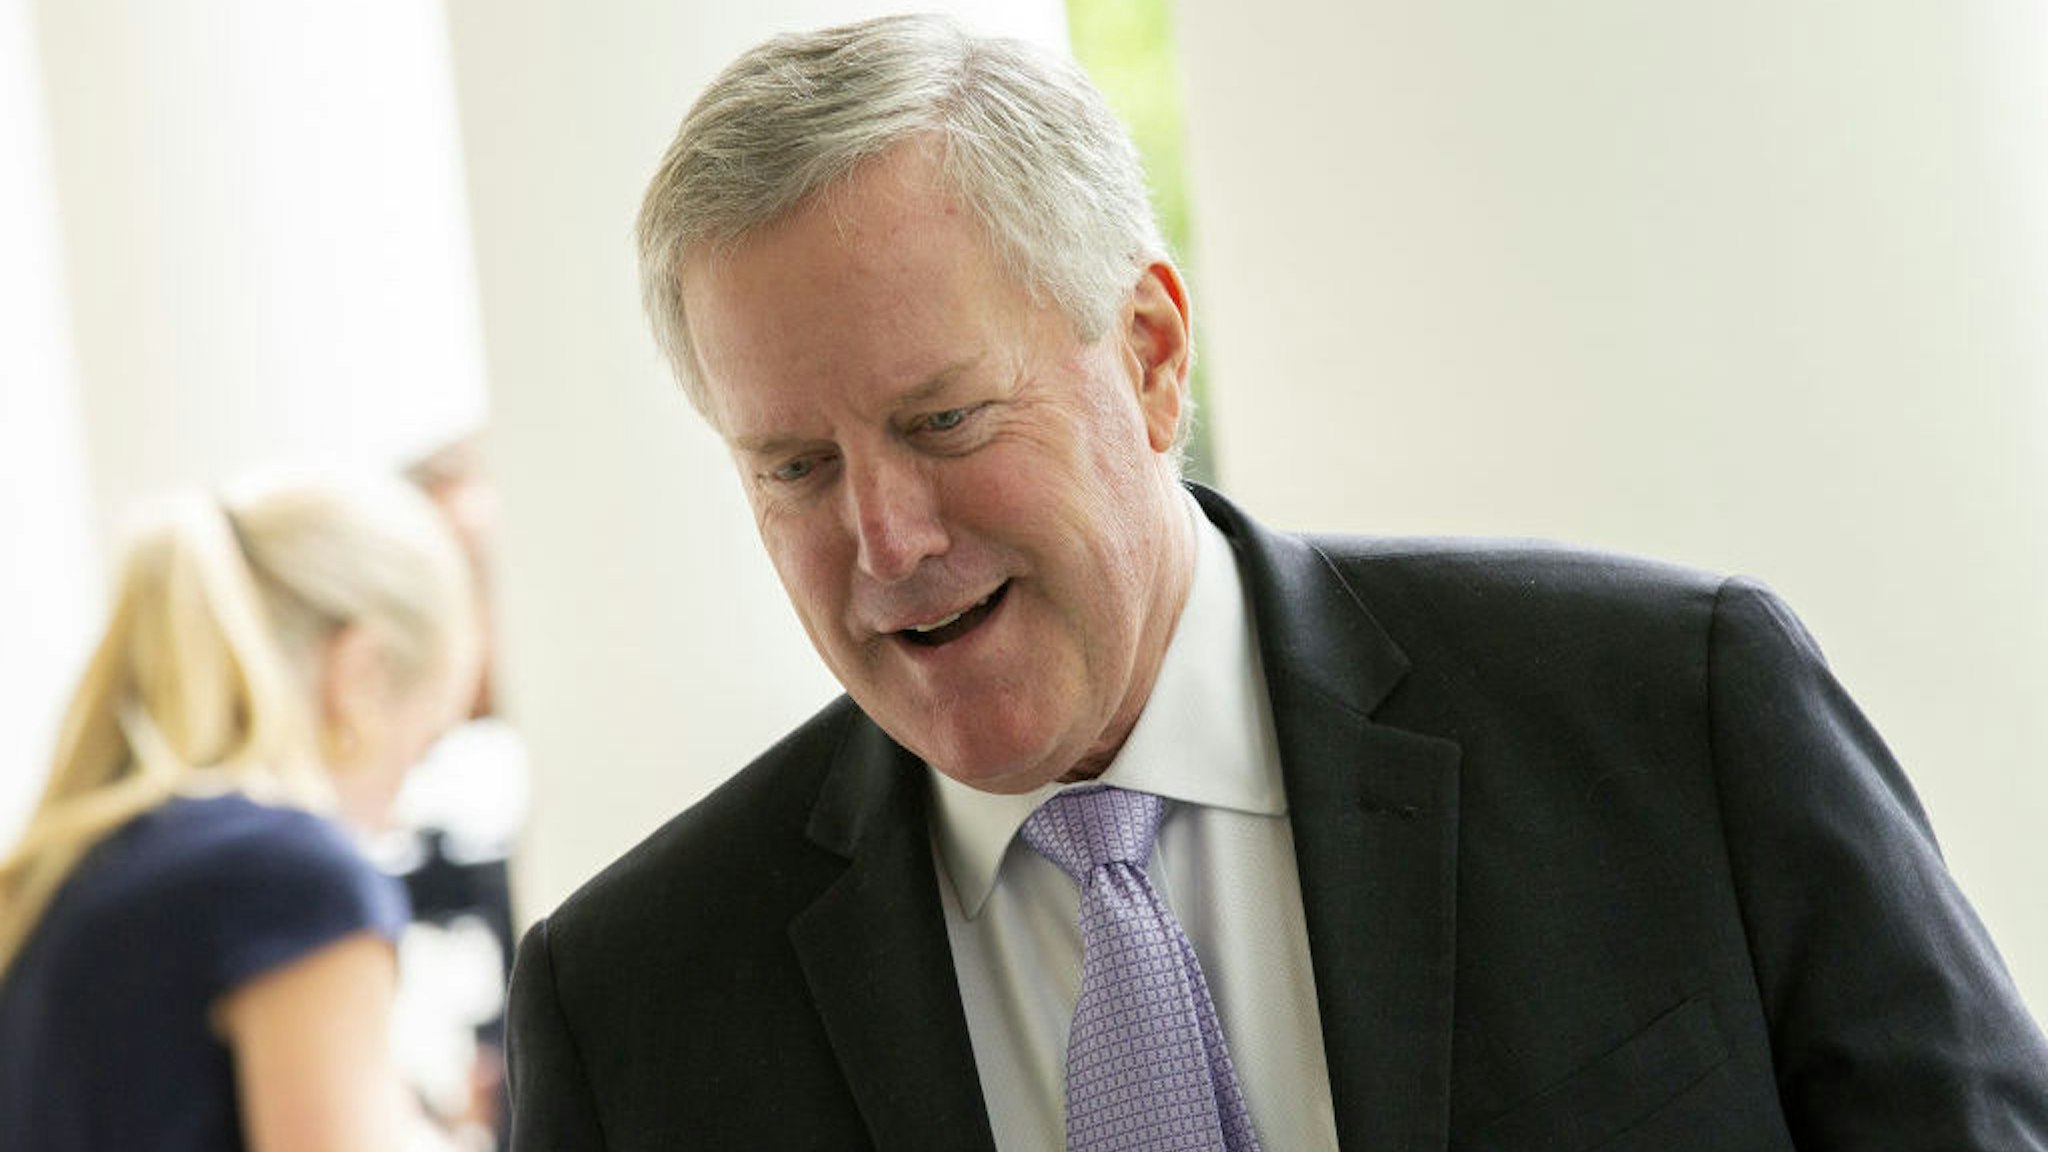 Mark Meadows, White House chief of staff, arrives to the Rose Garden of the White House in Washington, D.C., U.S., on Tuesday, June 16, 2020. Trump said he met with families of Black people killed at the hands of police ahead of the Rose Garden speech where he will sign an executive order to encourage better training on use of force. Photographer: Stefani Reynolds/CNP/Bloomberg